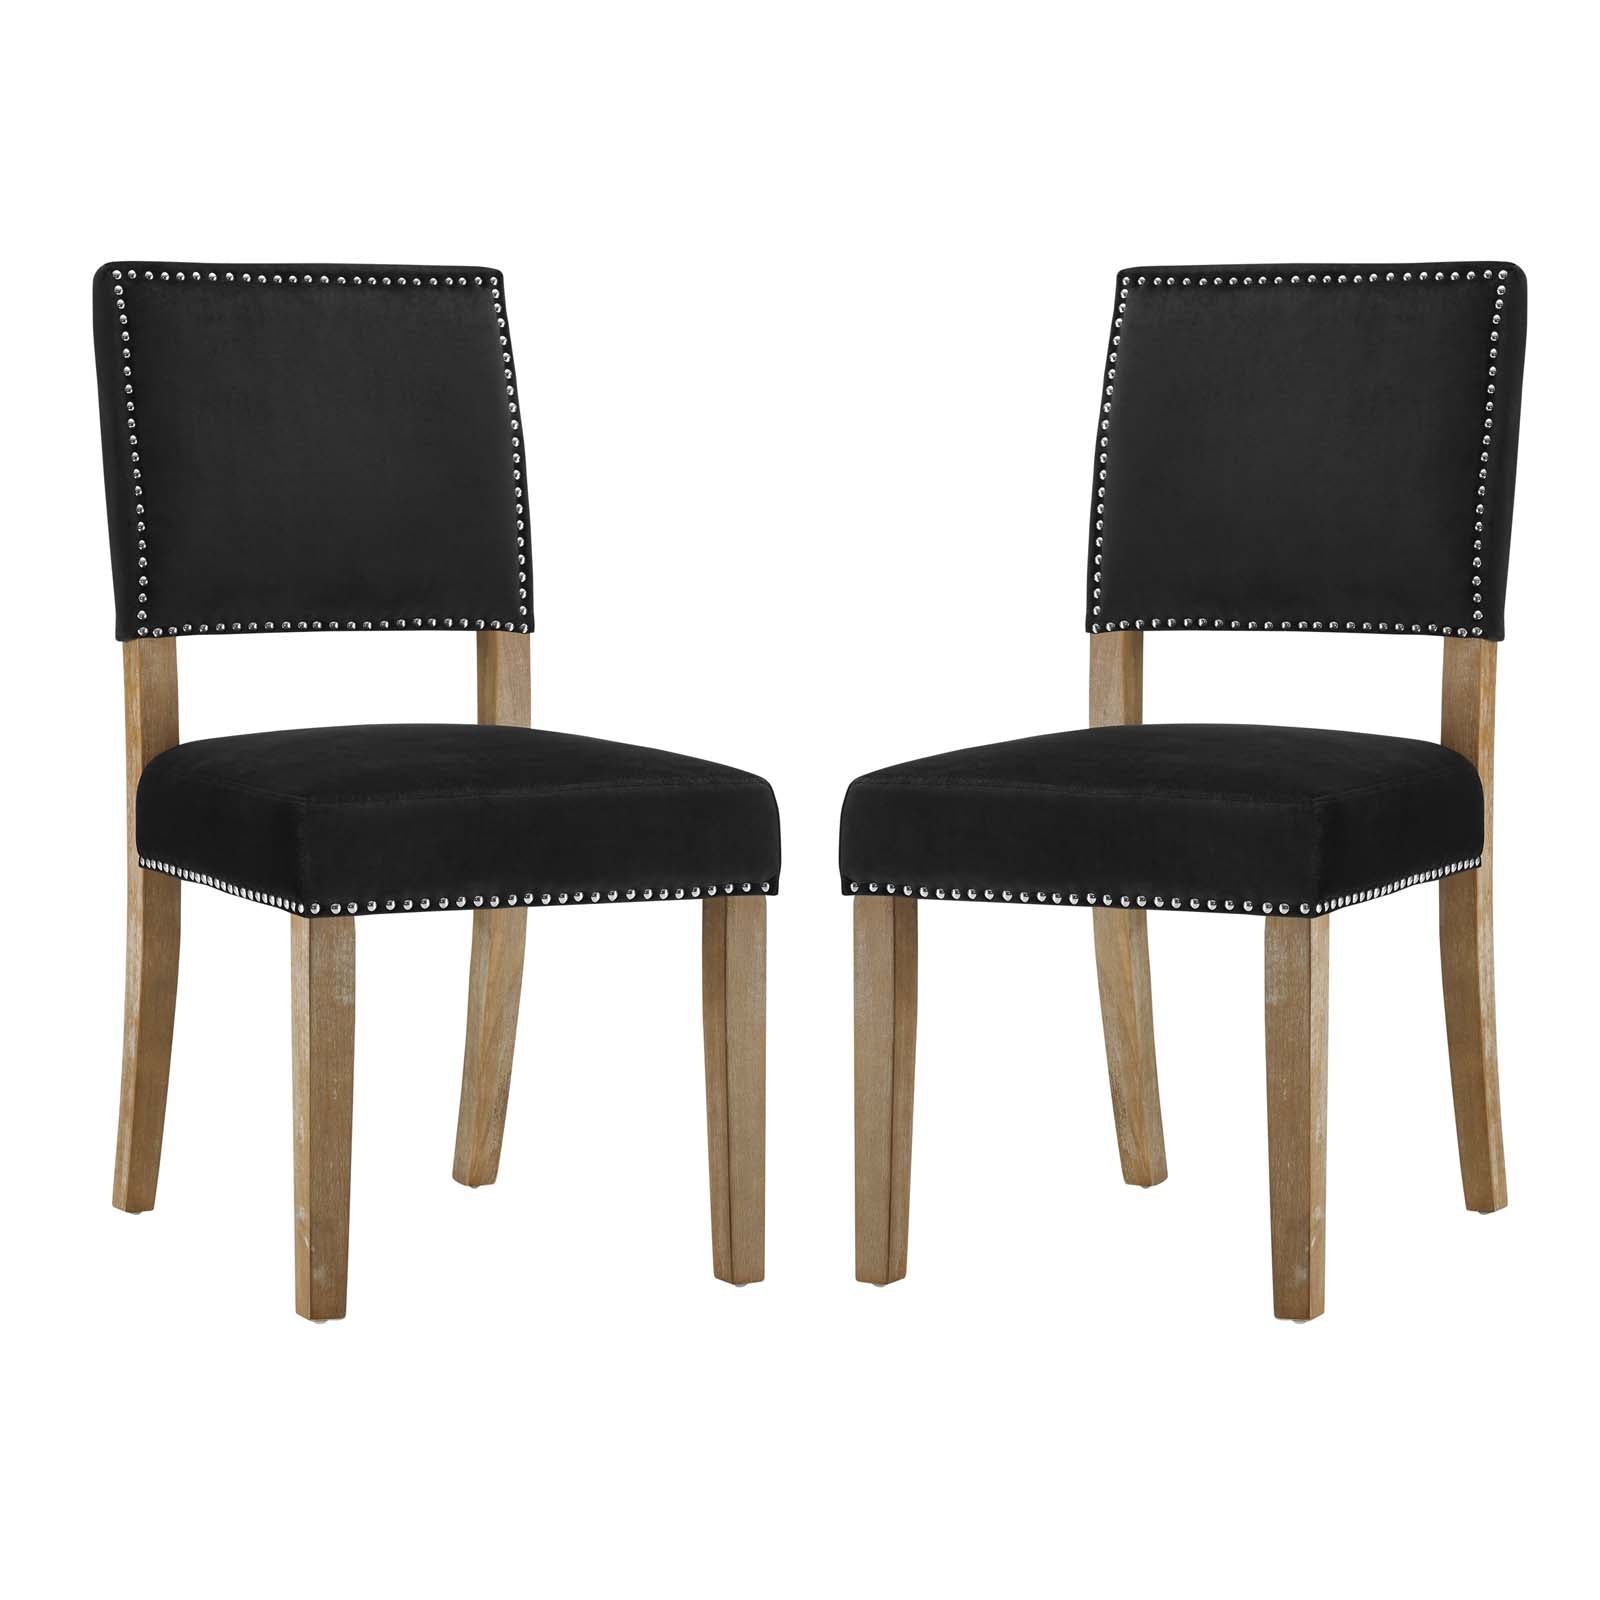 Modway Dining Chairs - Oblige Dining Chair Wood Black ( Set of 2 )